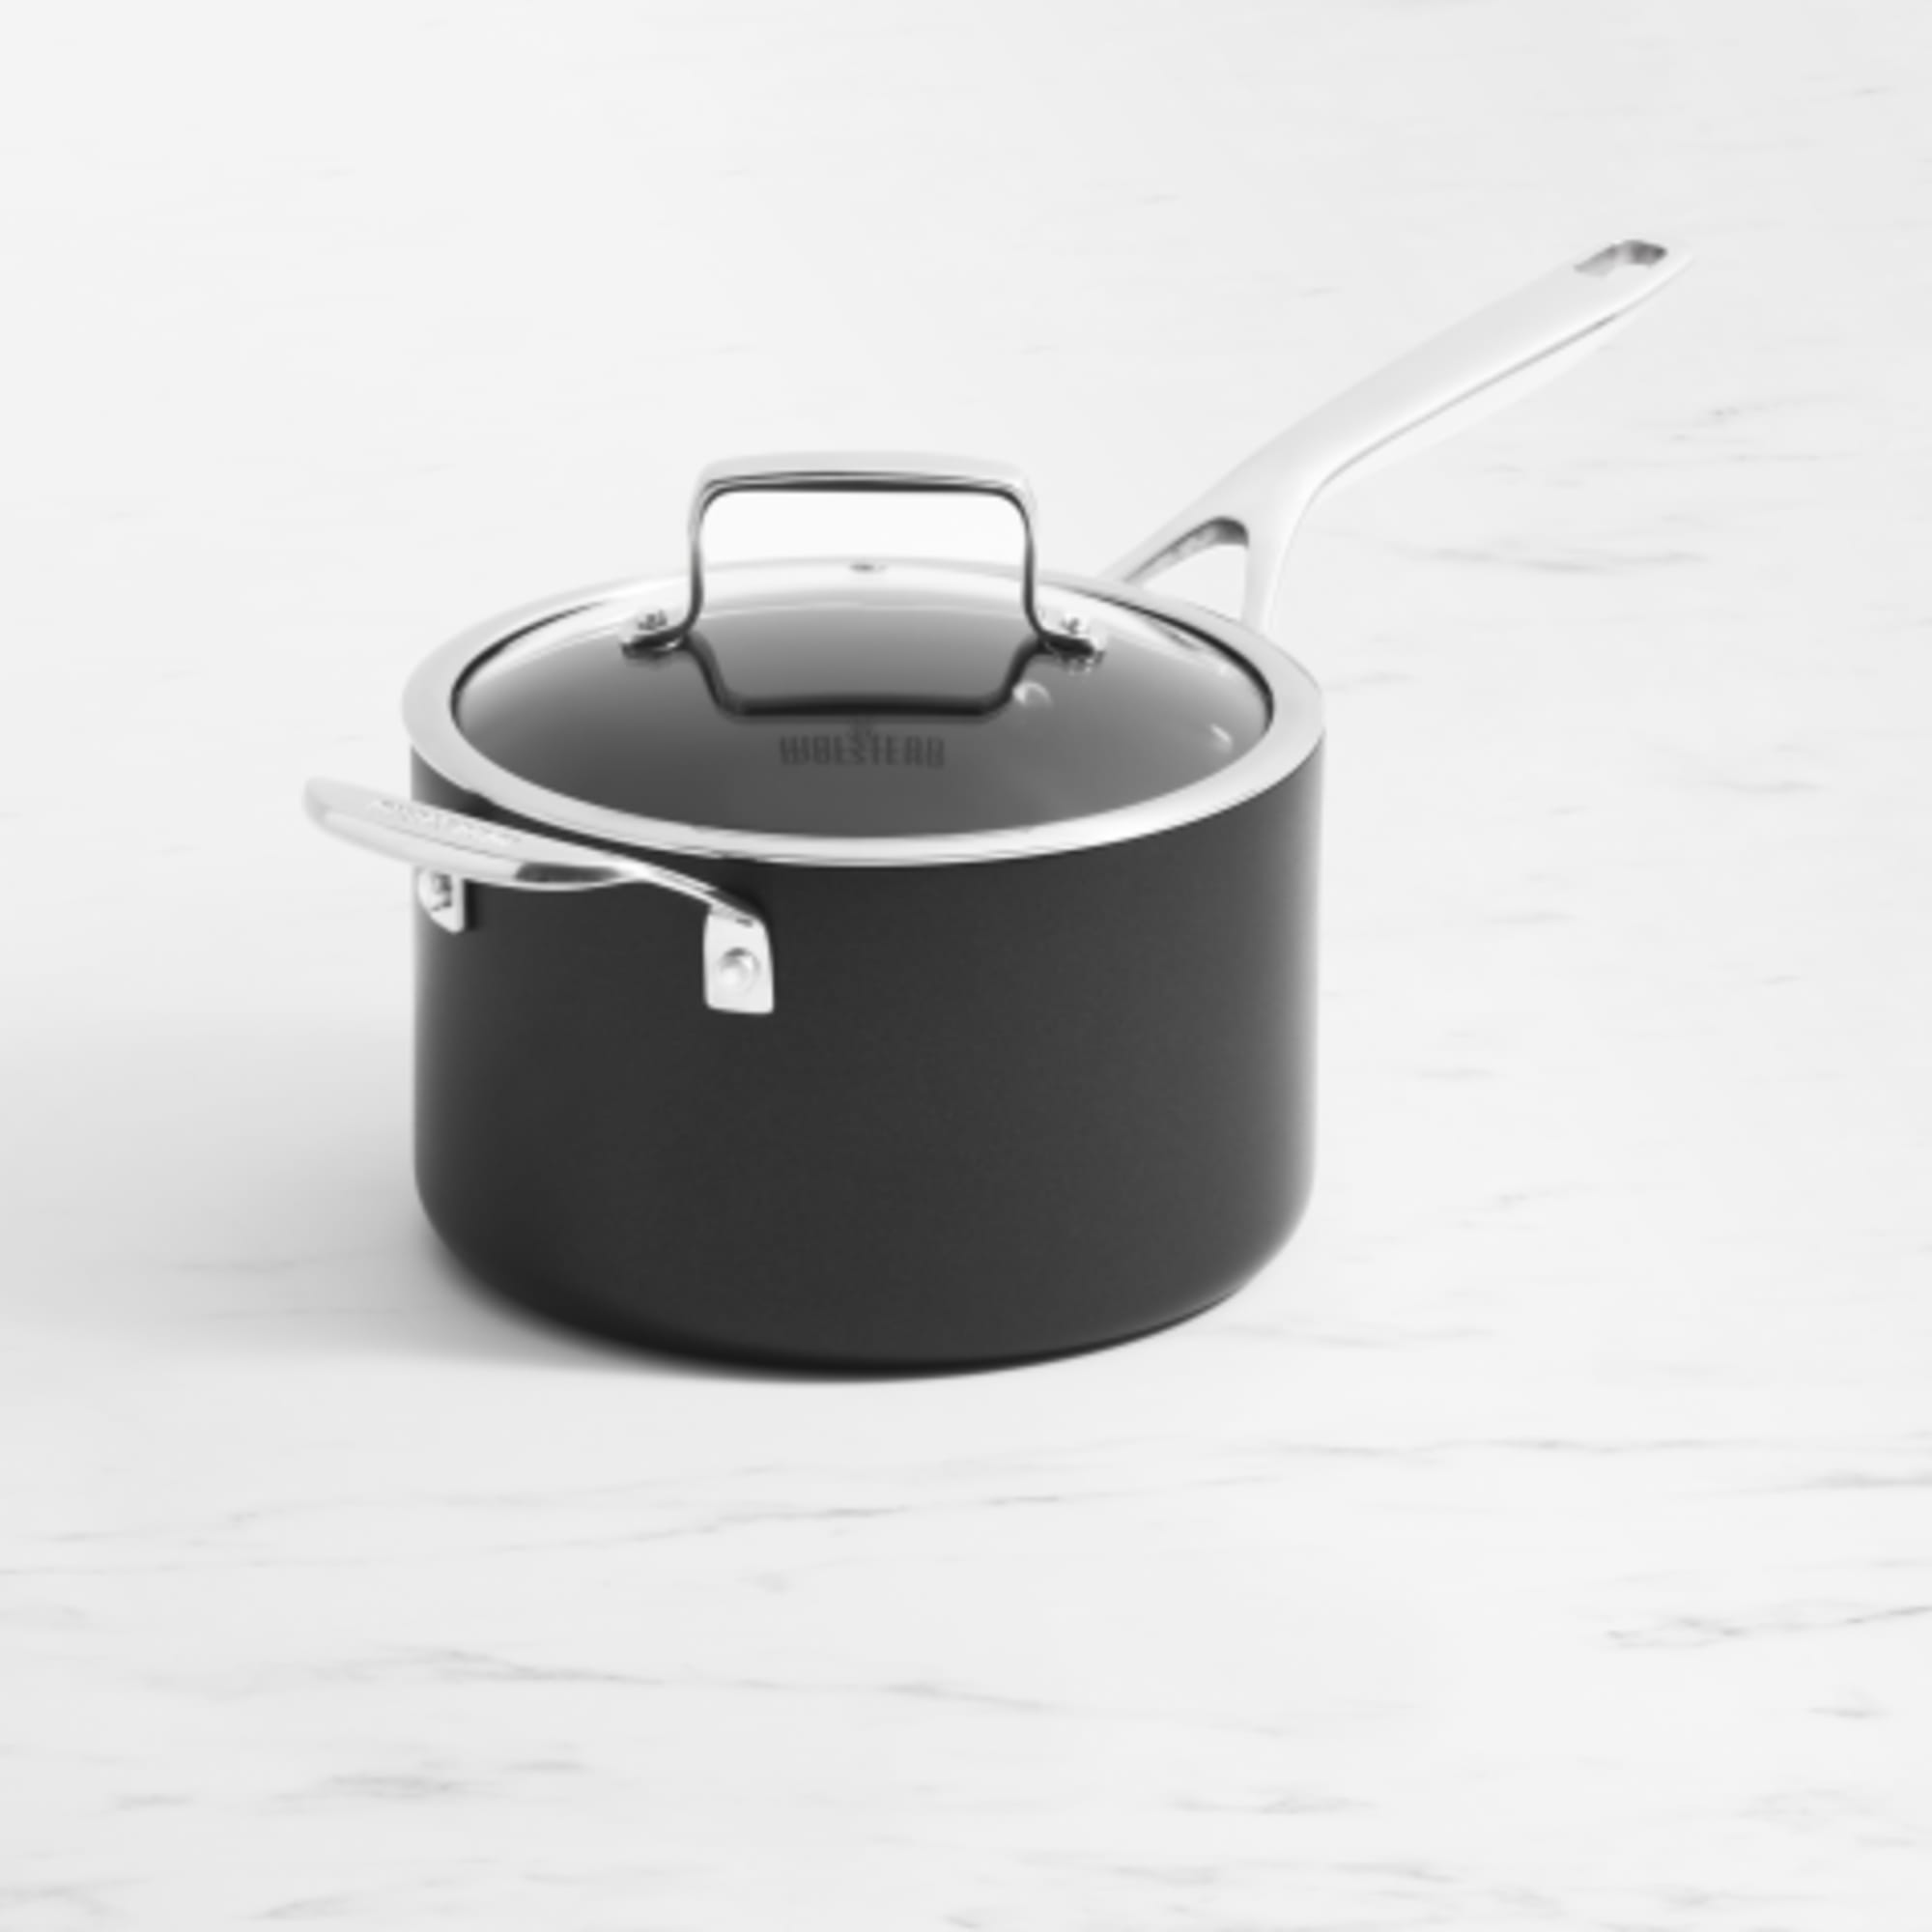 https://res.cloudinary.com/kitchenwarehouse/image/upload/c_fill,g_face,w_475/f_auto/t_PDP_2000x2000/Kitchen%20Warehouse%20Images%20/Wolstead-Superior_-Saucepan-w-Lid-and-Handle-20cm-3-8L.jpg